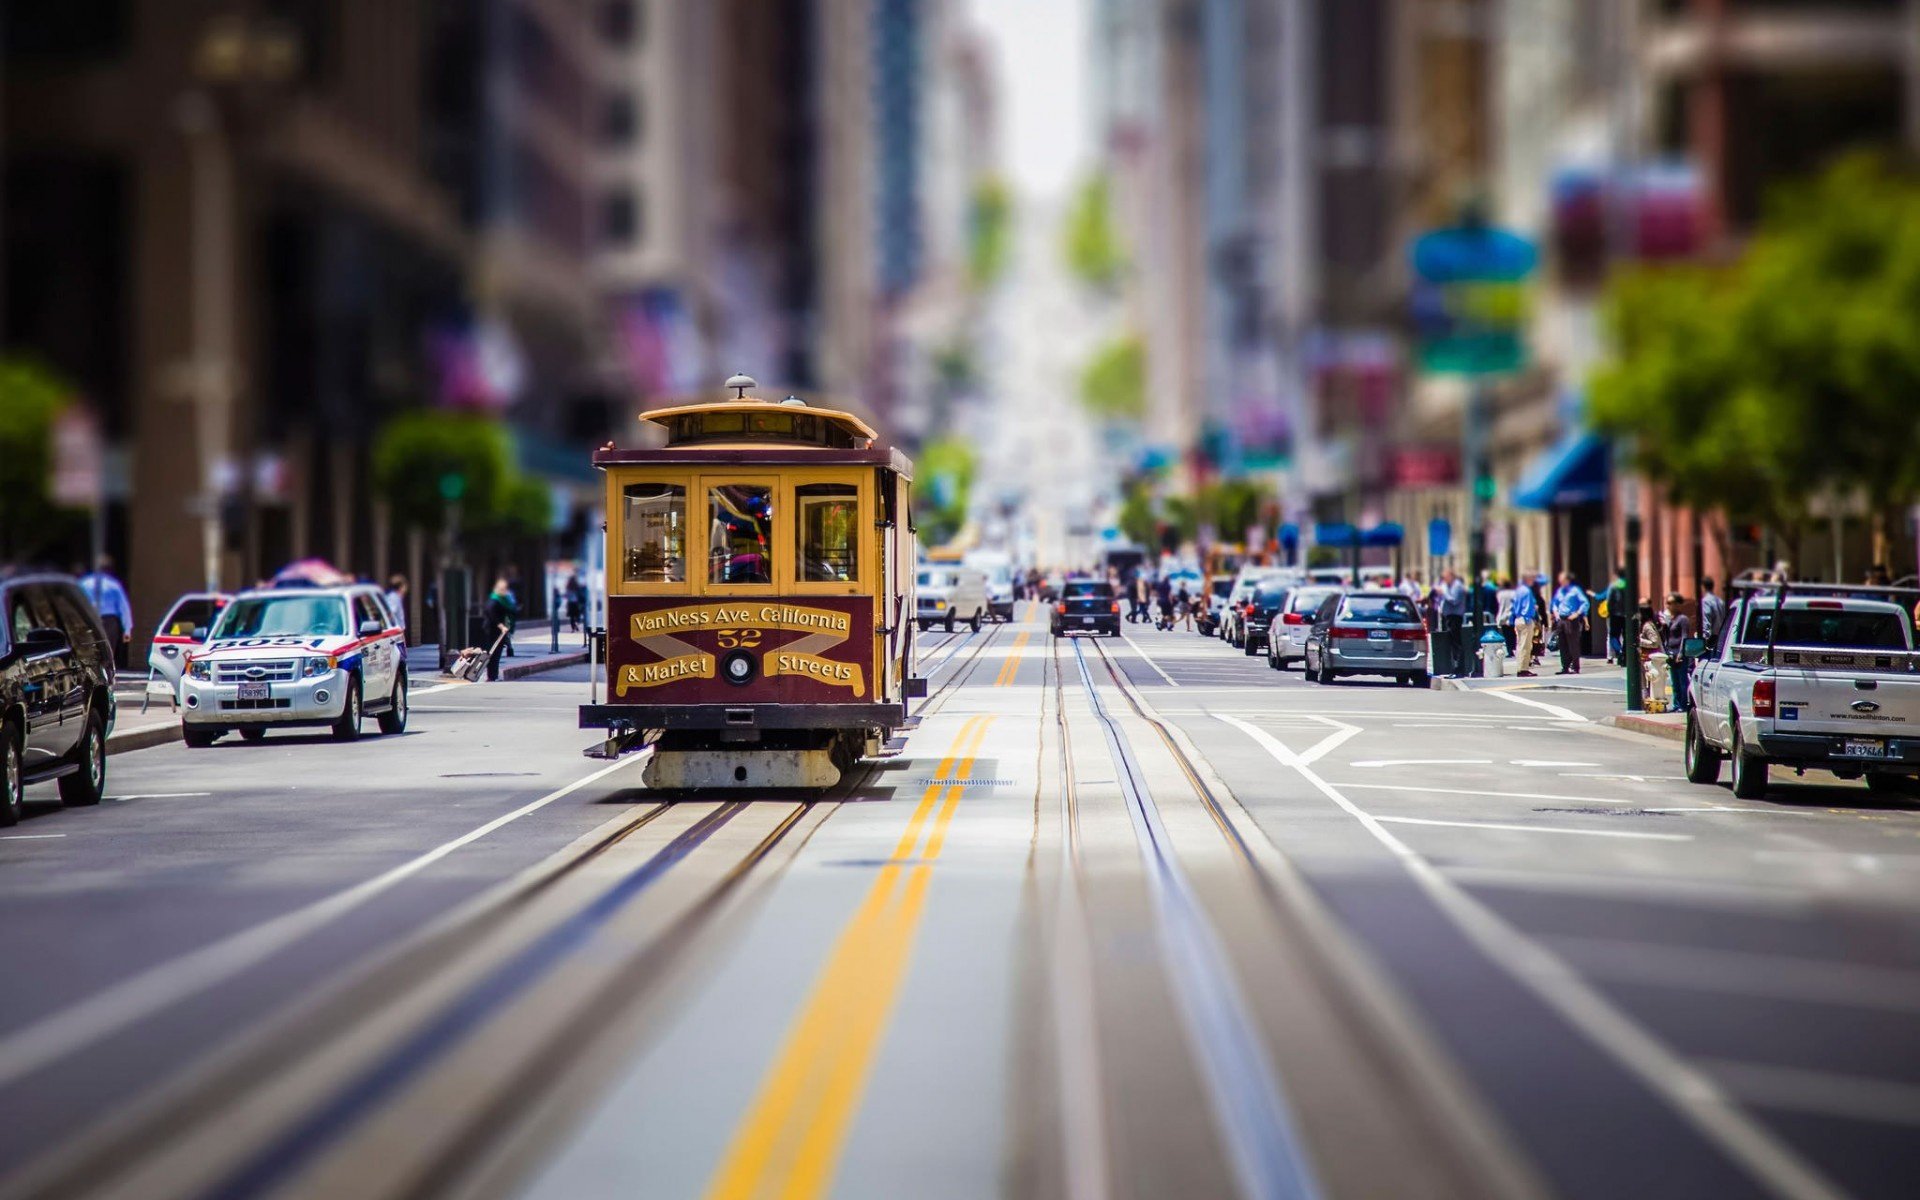 Desktop Wallpaper San Francisco Street View, HD Image, Picture, Background, 9i6ytb